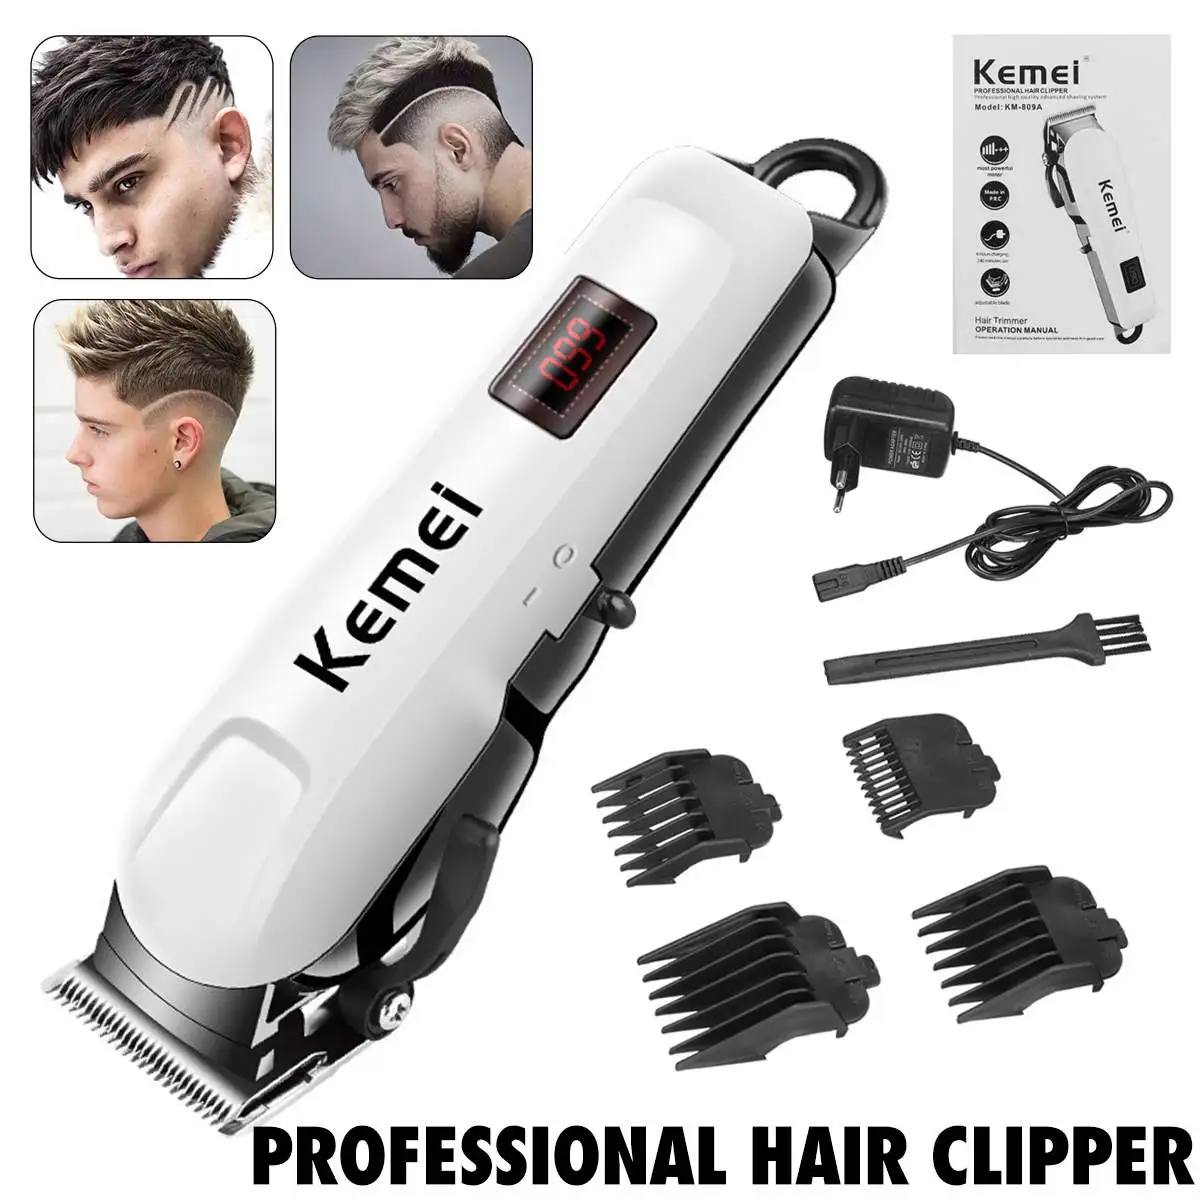 

Professional Barber Hair Clipper Hair Trimmers LCD Rechargeable Electric Cutting Machine Beard Trimmer Shaver Razor Men Cutter